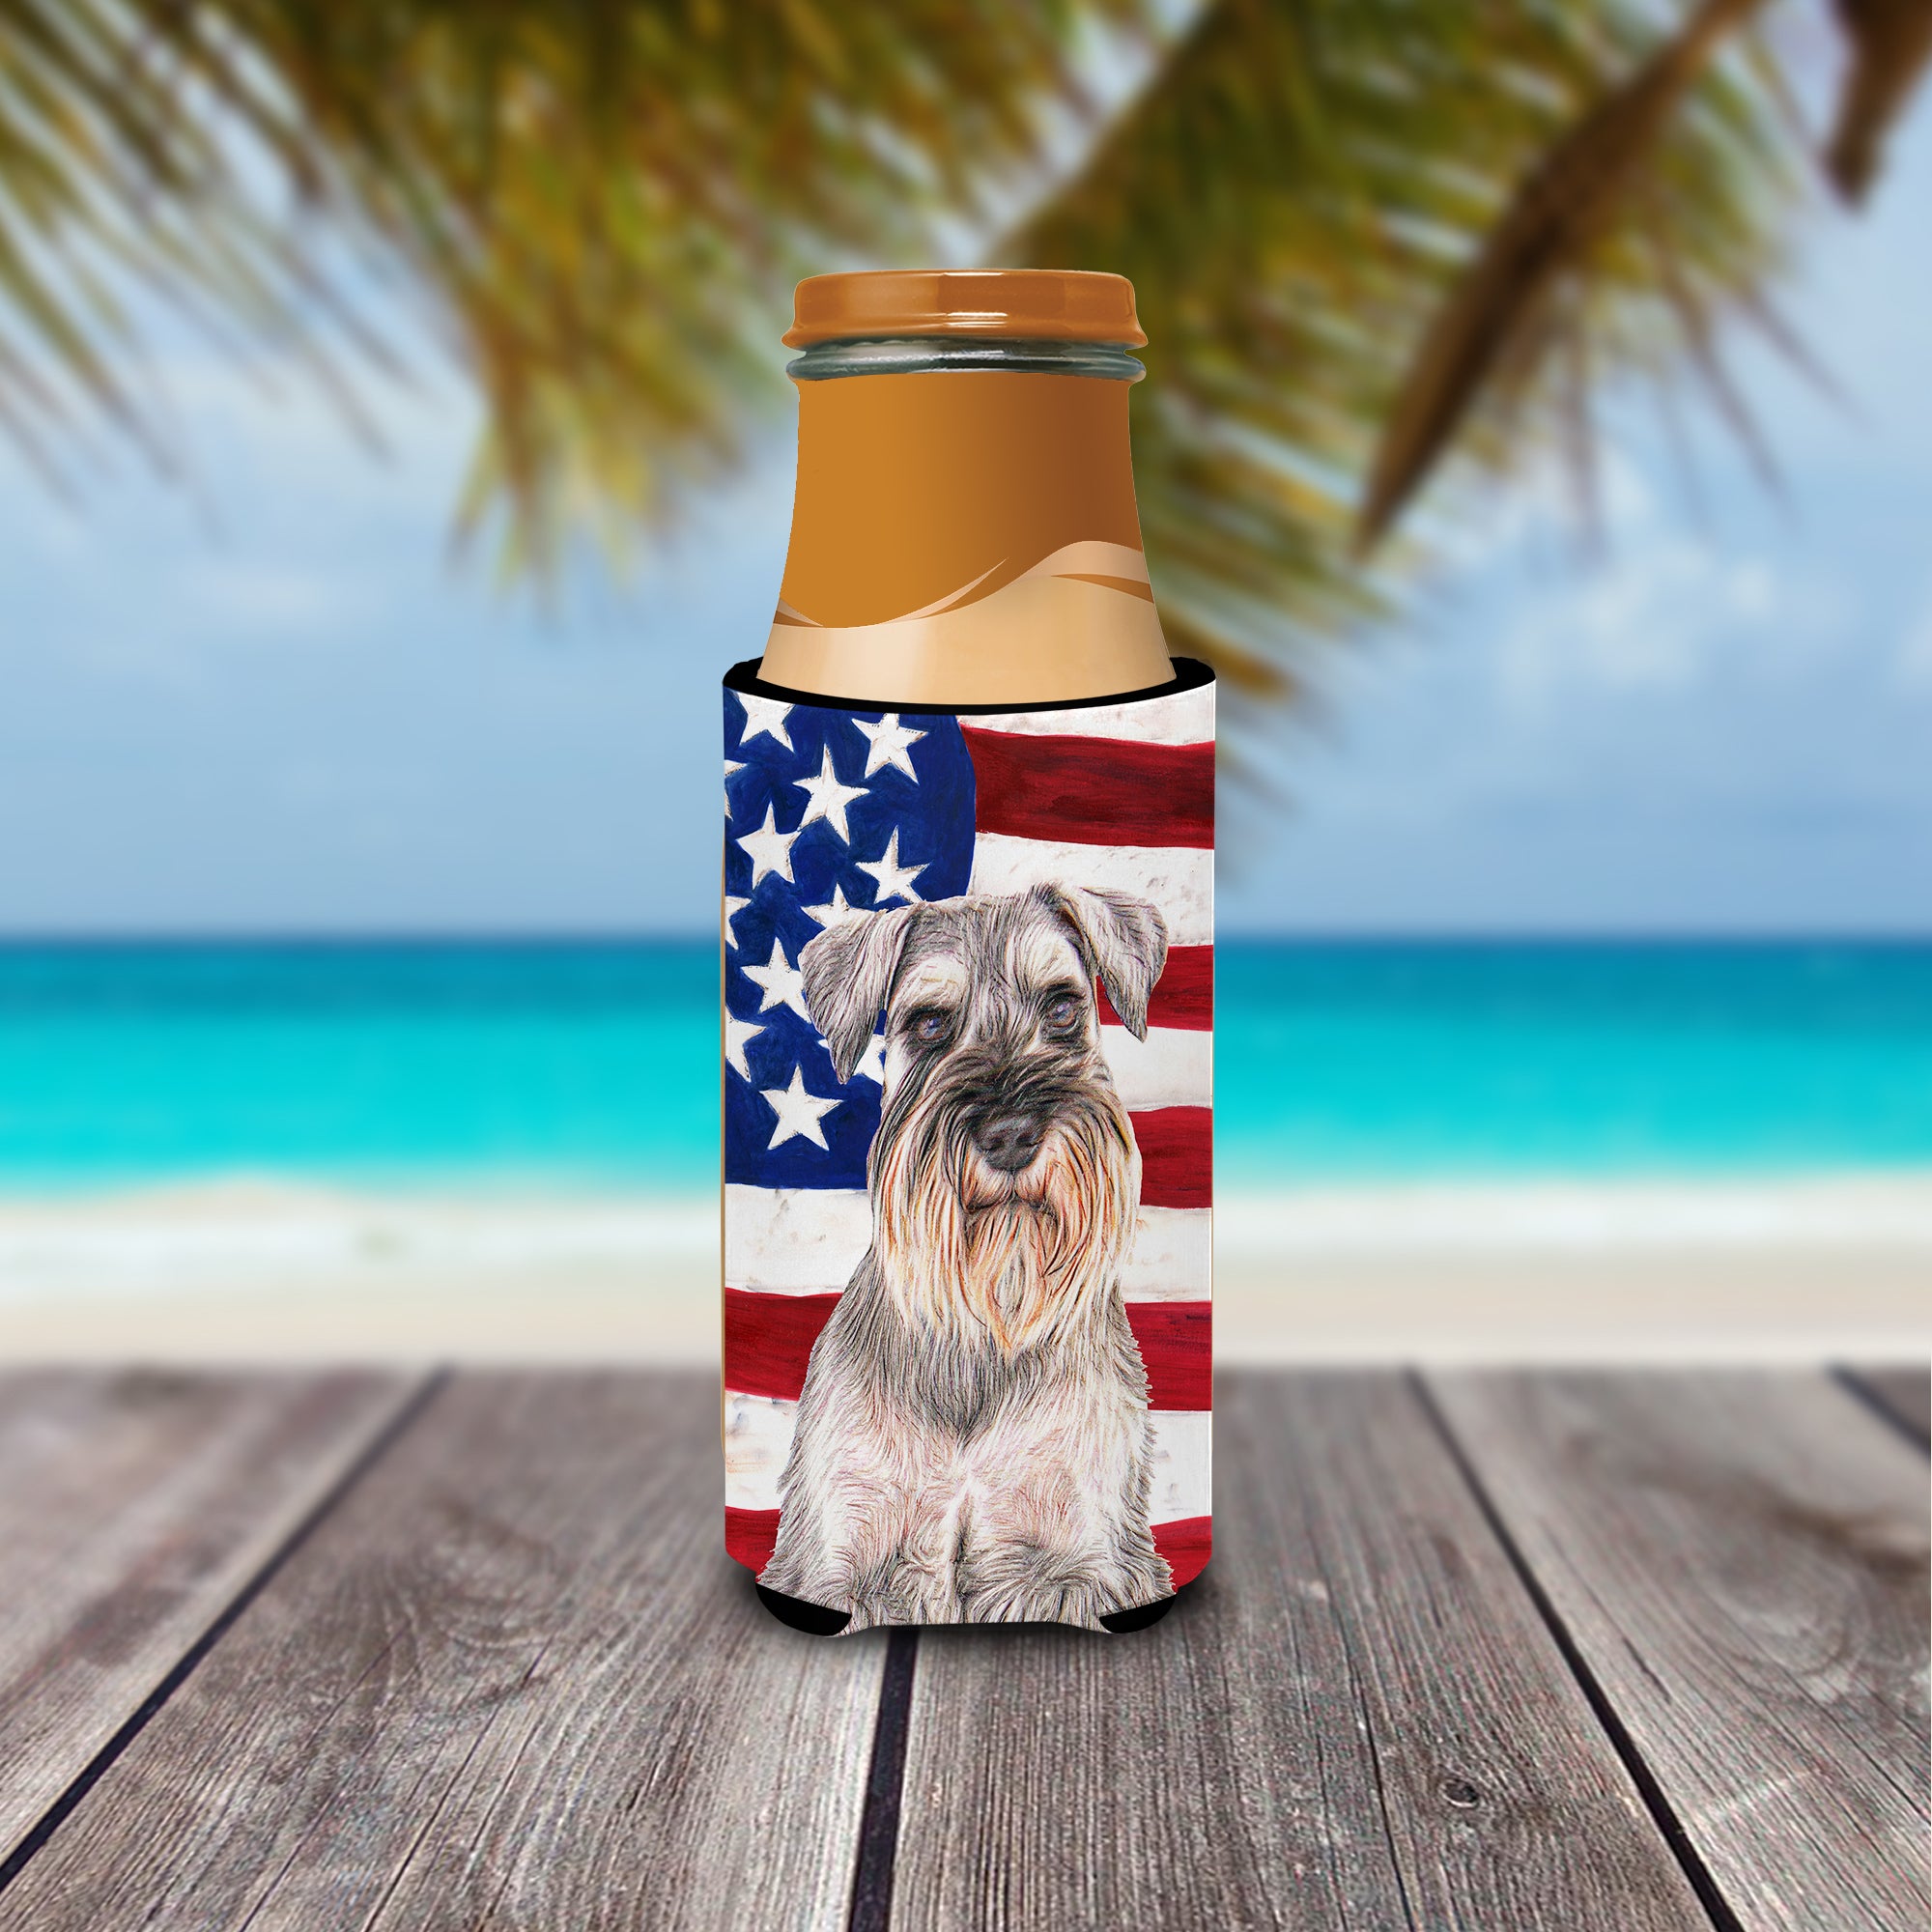 USA American Flag with Schnauzer Ultra Beverage Insulators for slim cans KJ1158MUK.